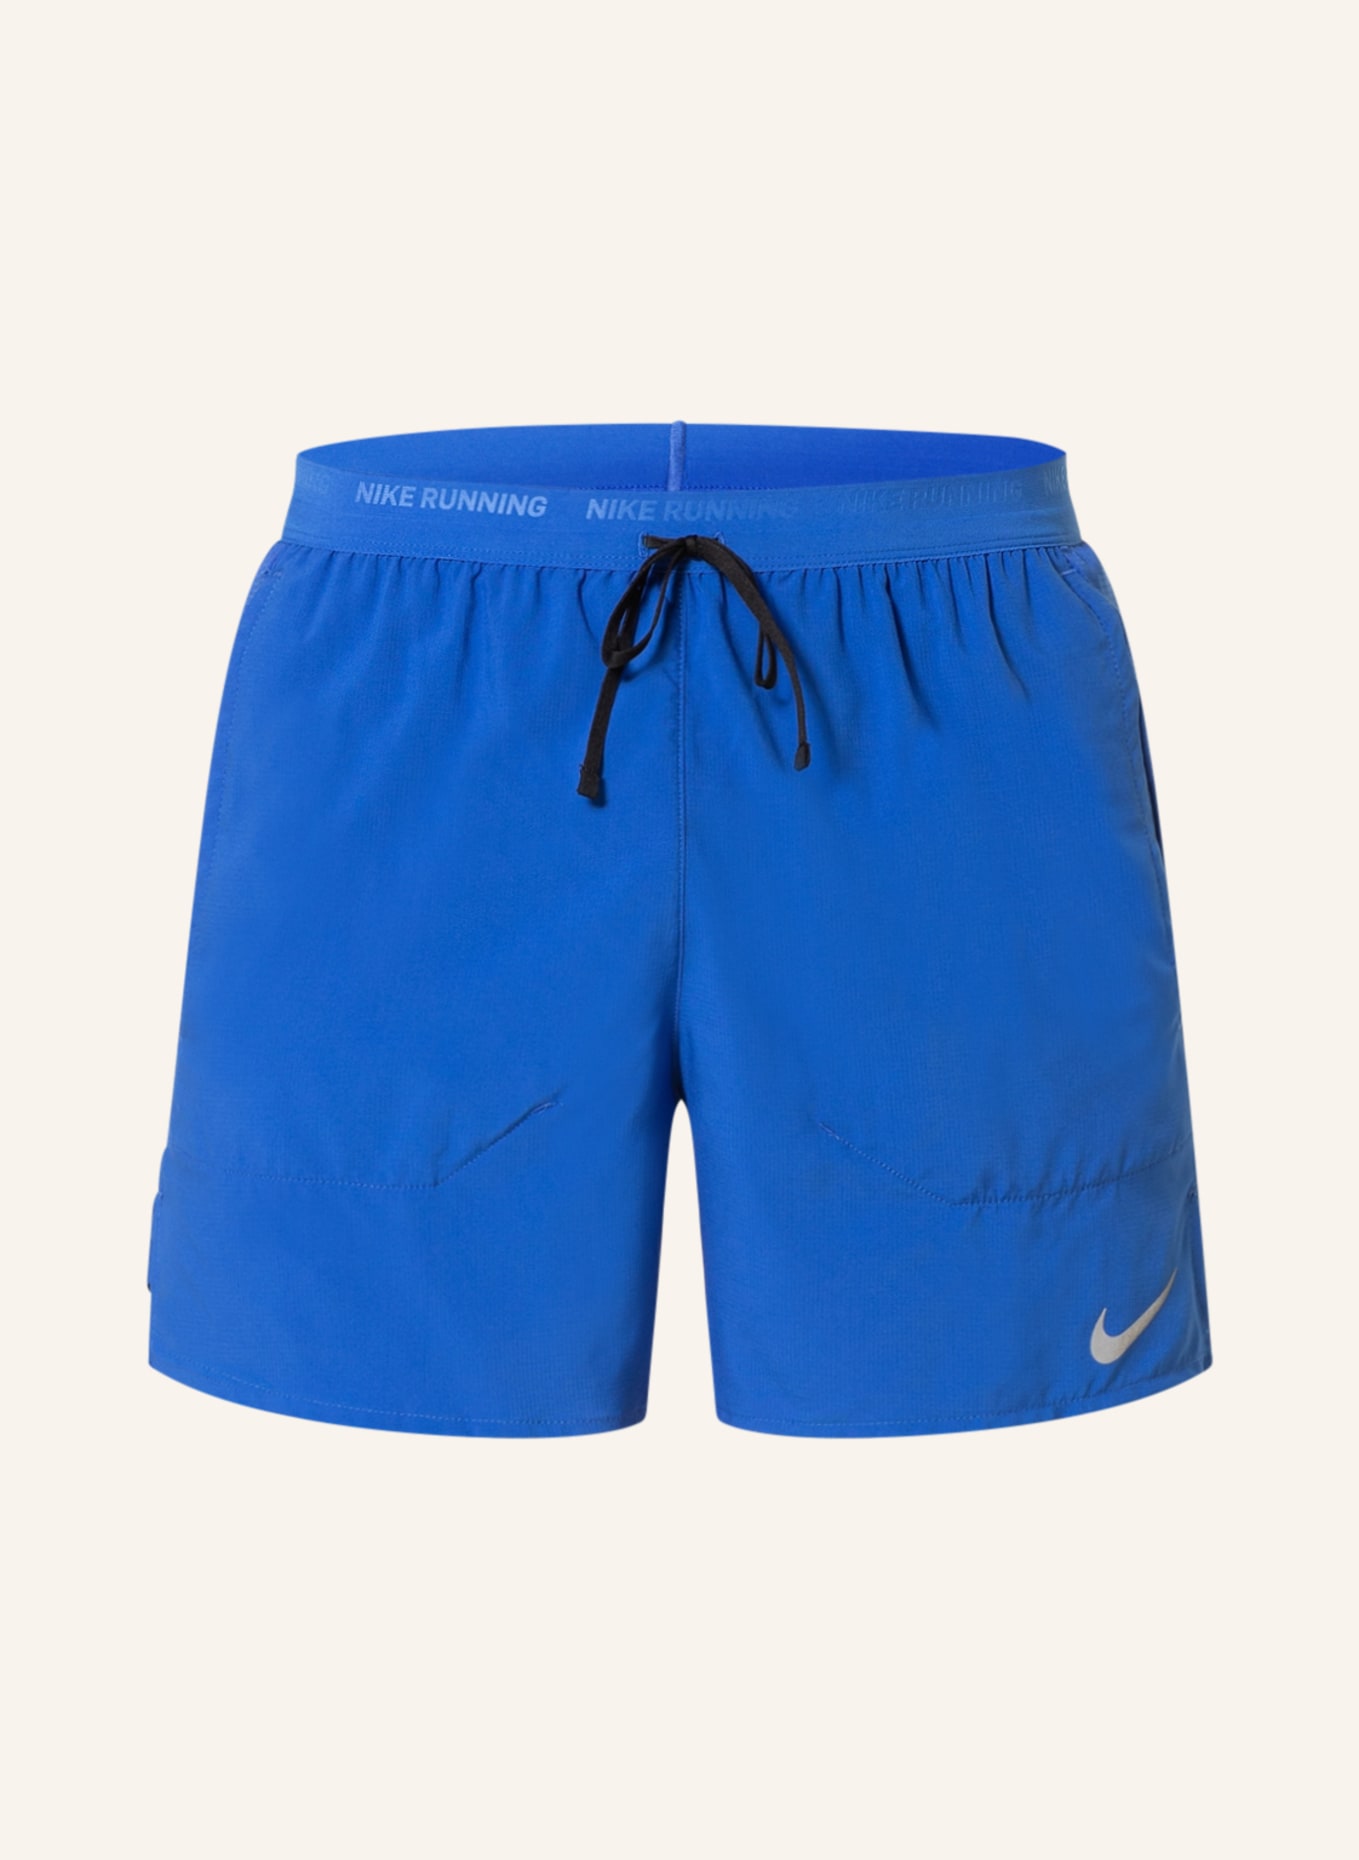 Nike Running shorts DRI-FIT STRIDE, Color: BLUE (Image 1)